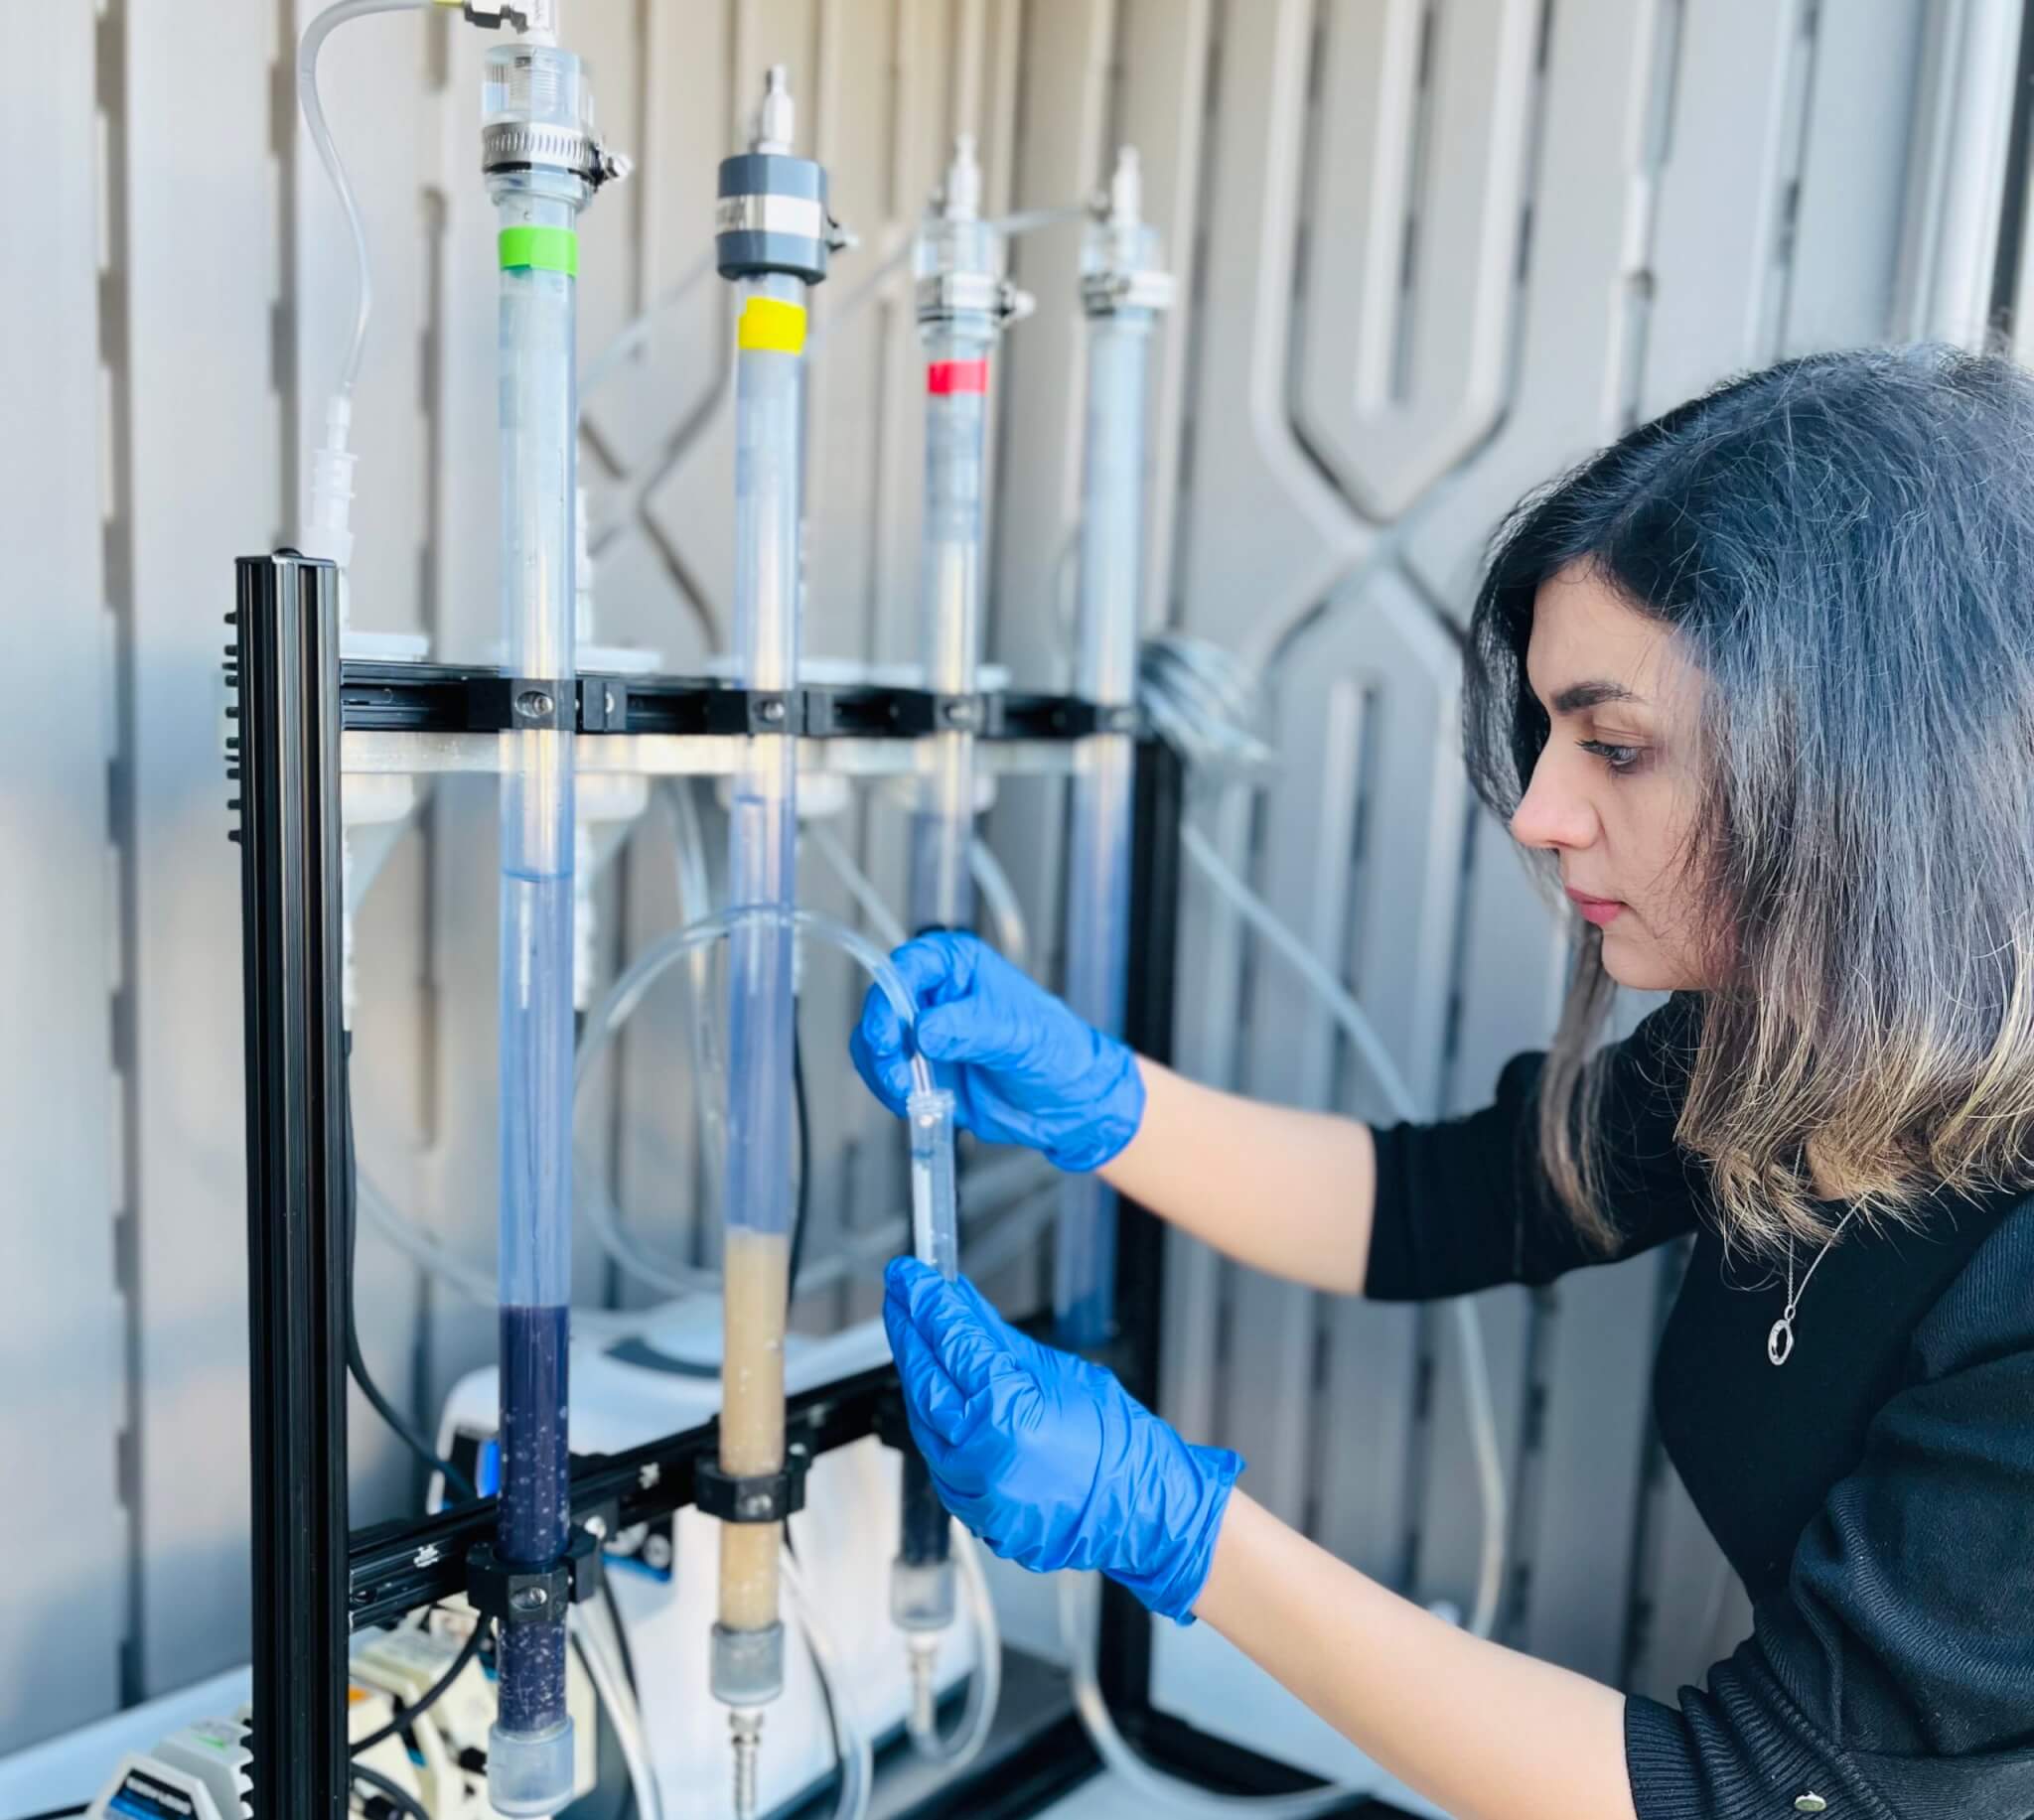 Fatemeh Asadi Zeidabadi works on water treatment system to remove forever chemicals